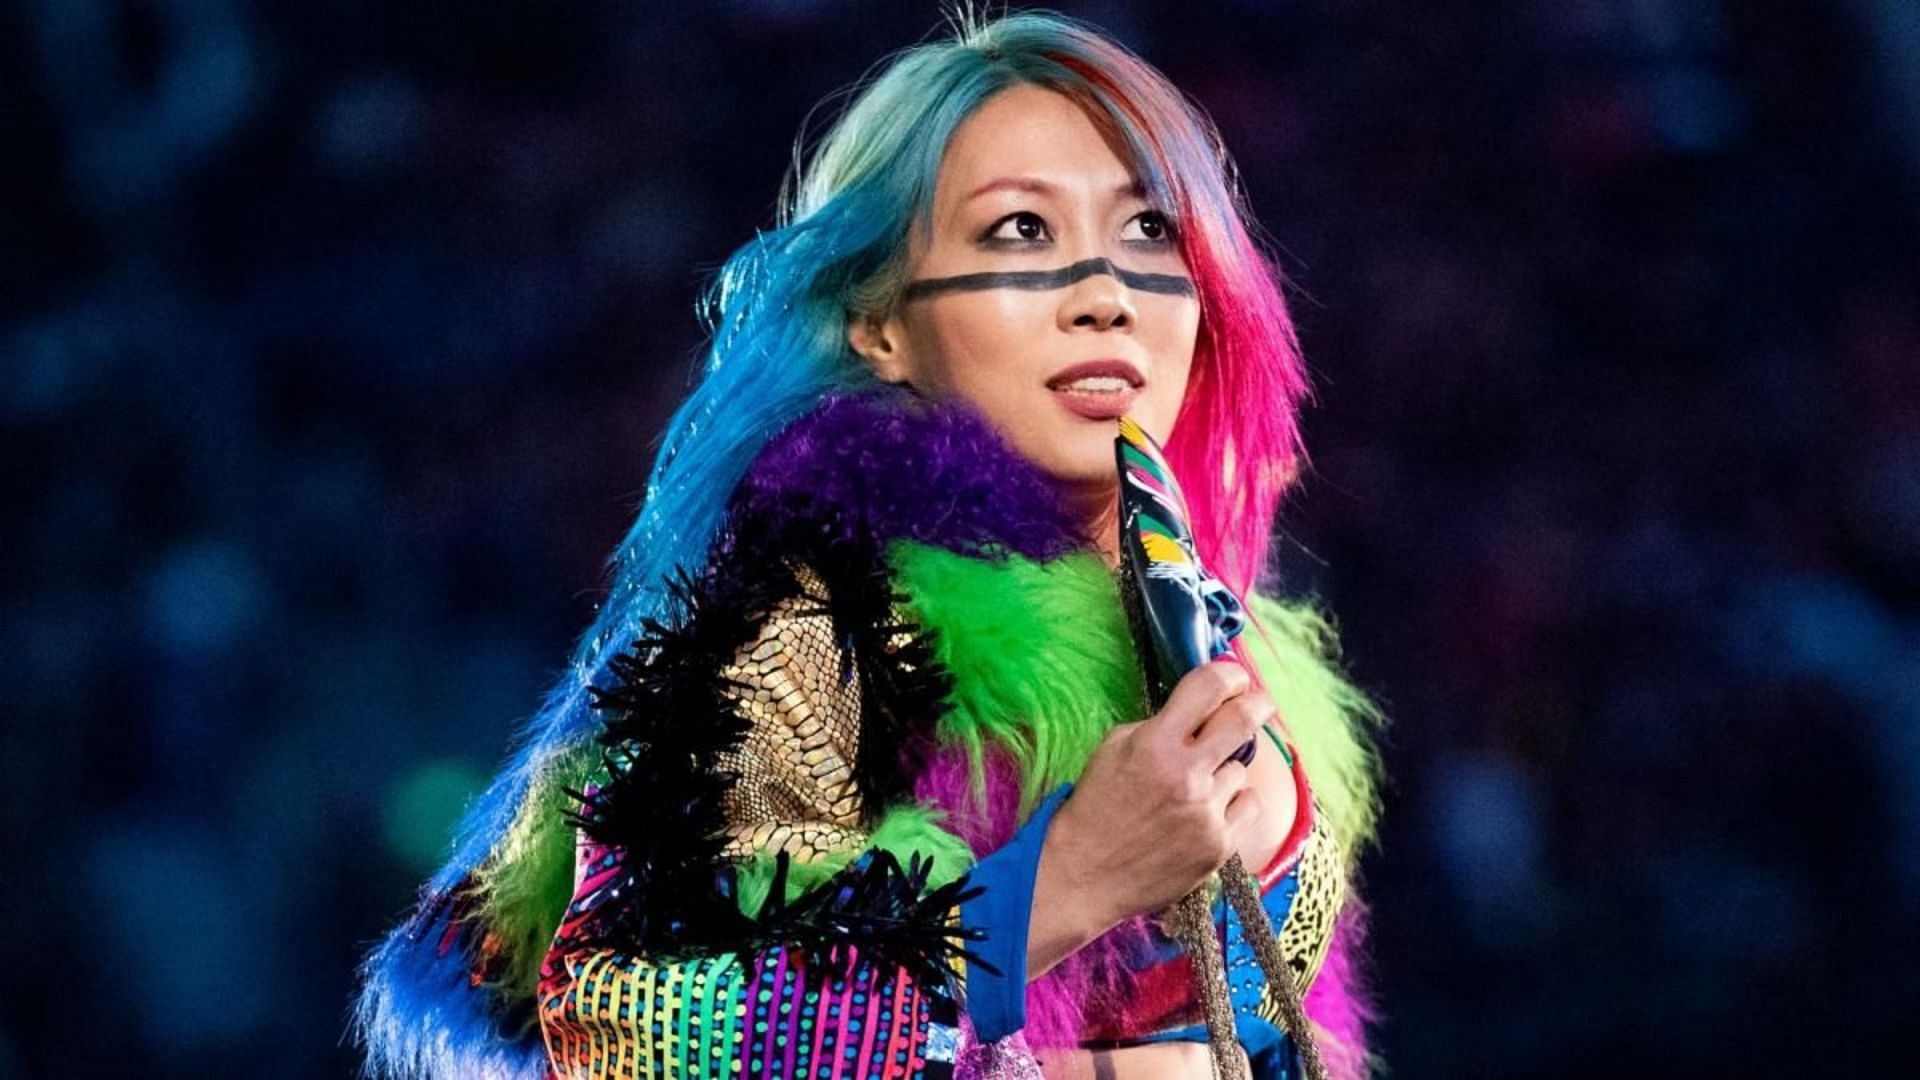 Asuka is a Grand Slam and Triple Crown Champion